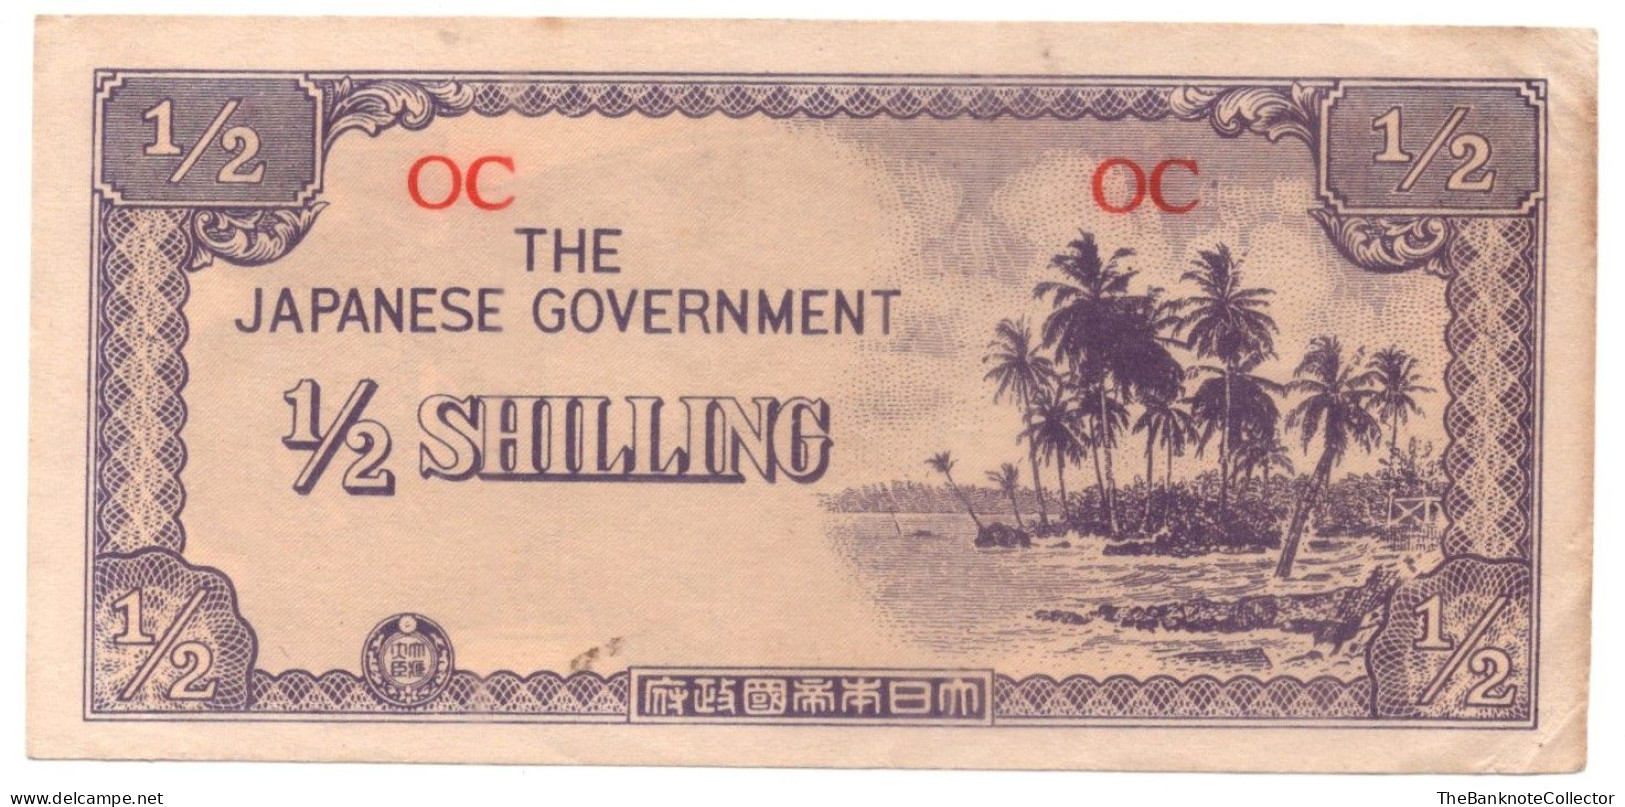 Japan Government Occupation JIM Oceania 1/2 Shilling WWII ND 1942 P-1 EF - Giappone